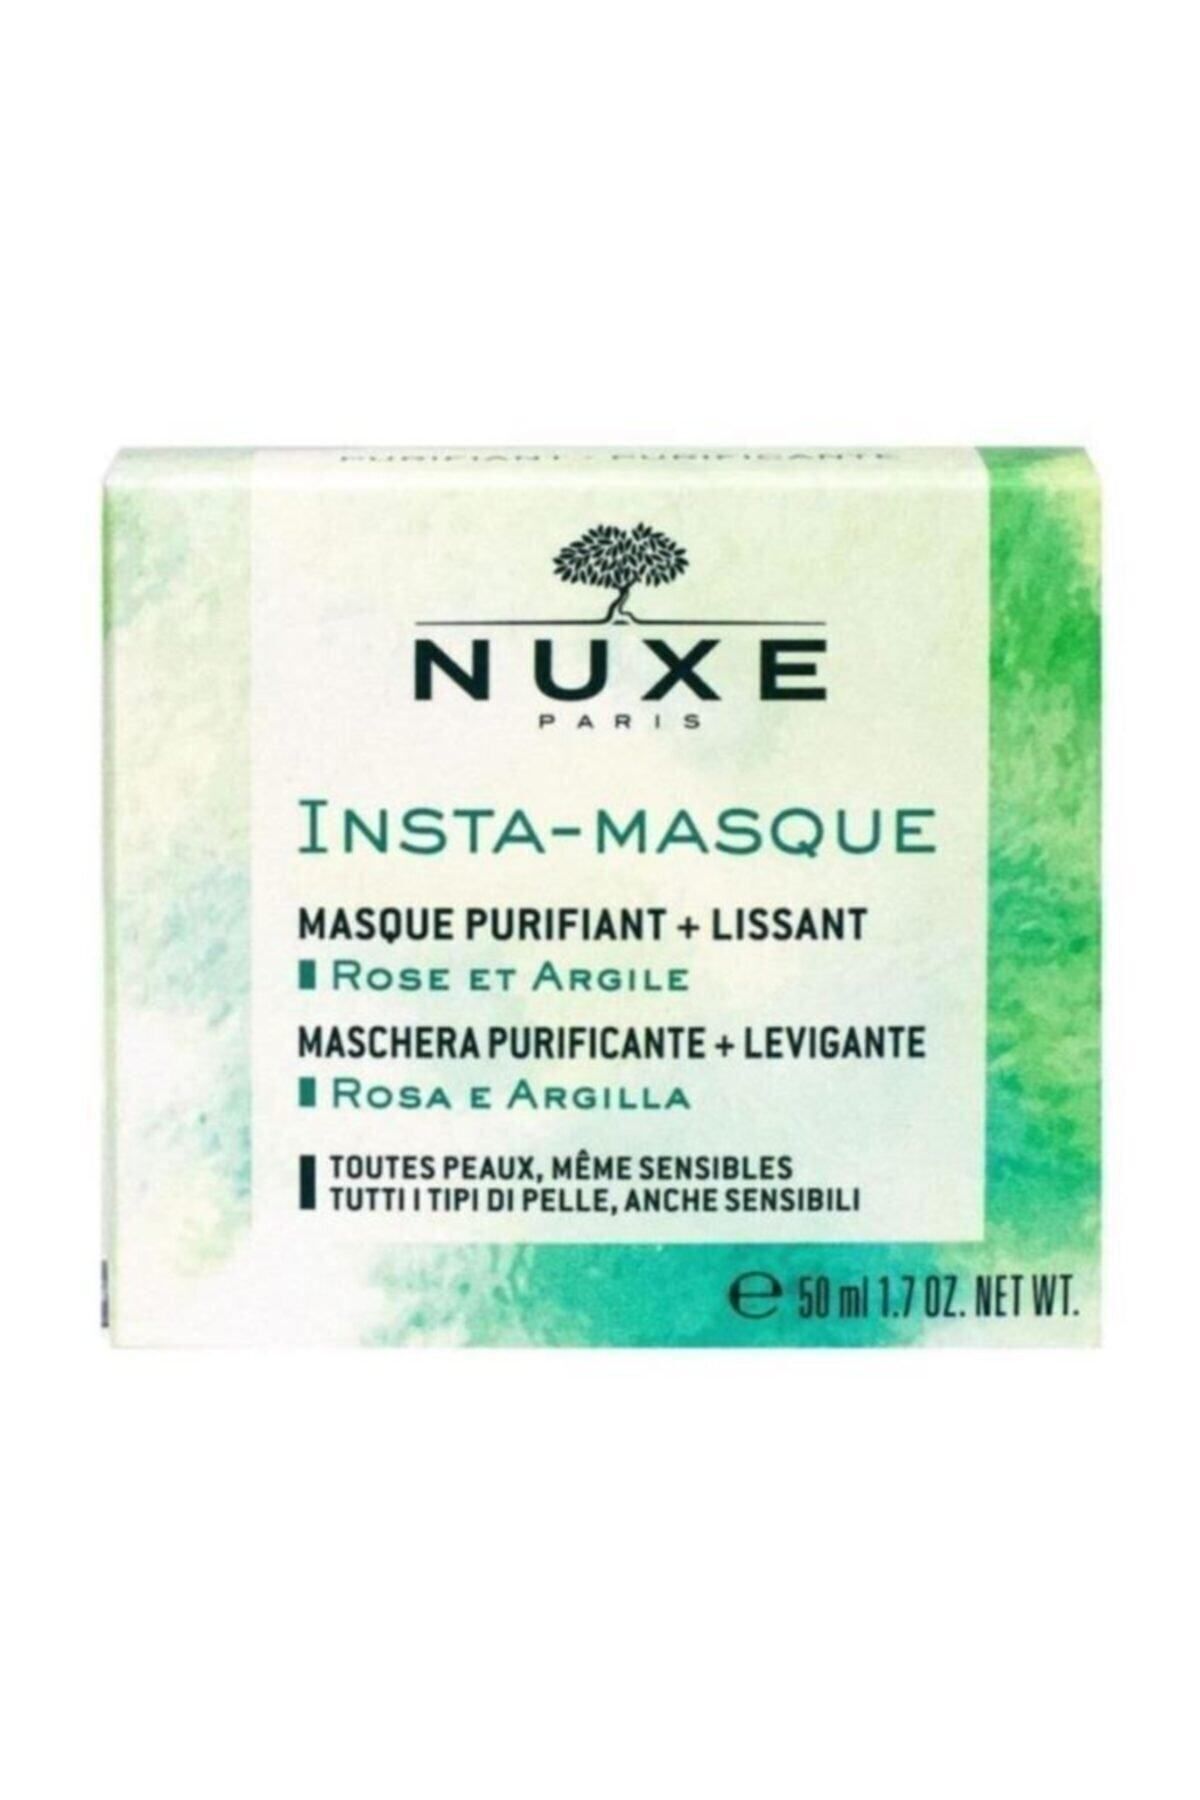 Nuxe INSTA-MASQUE PURİFYİNG SKİN BRİGHTENİNG AND PURİFYİNG CLAY MASK 50ML DEMBA2093